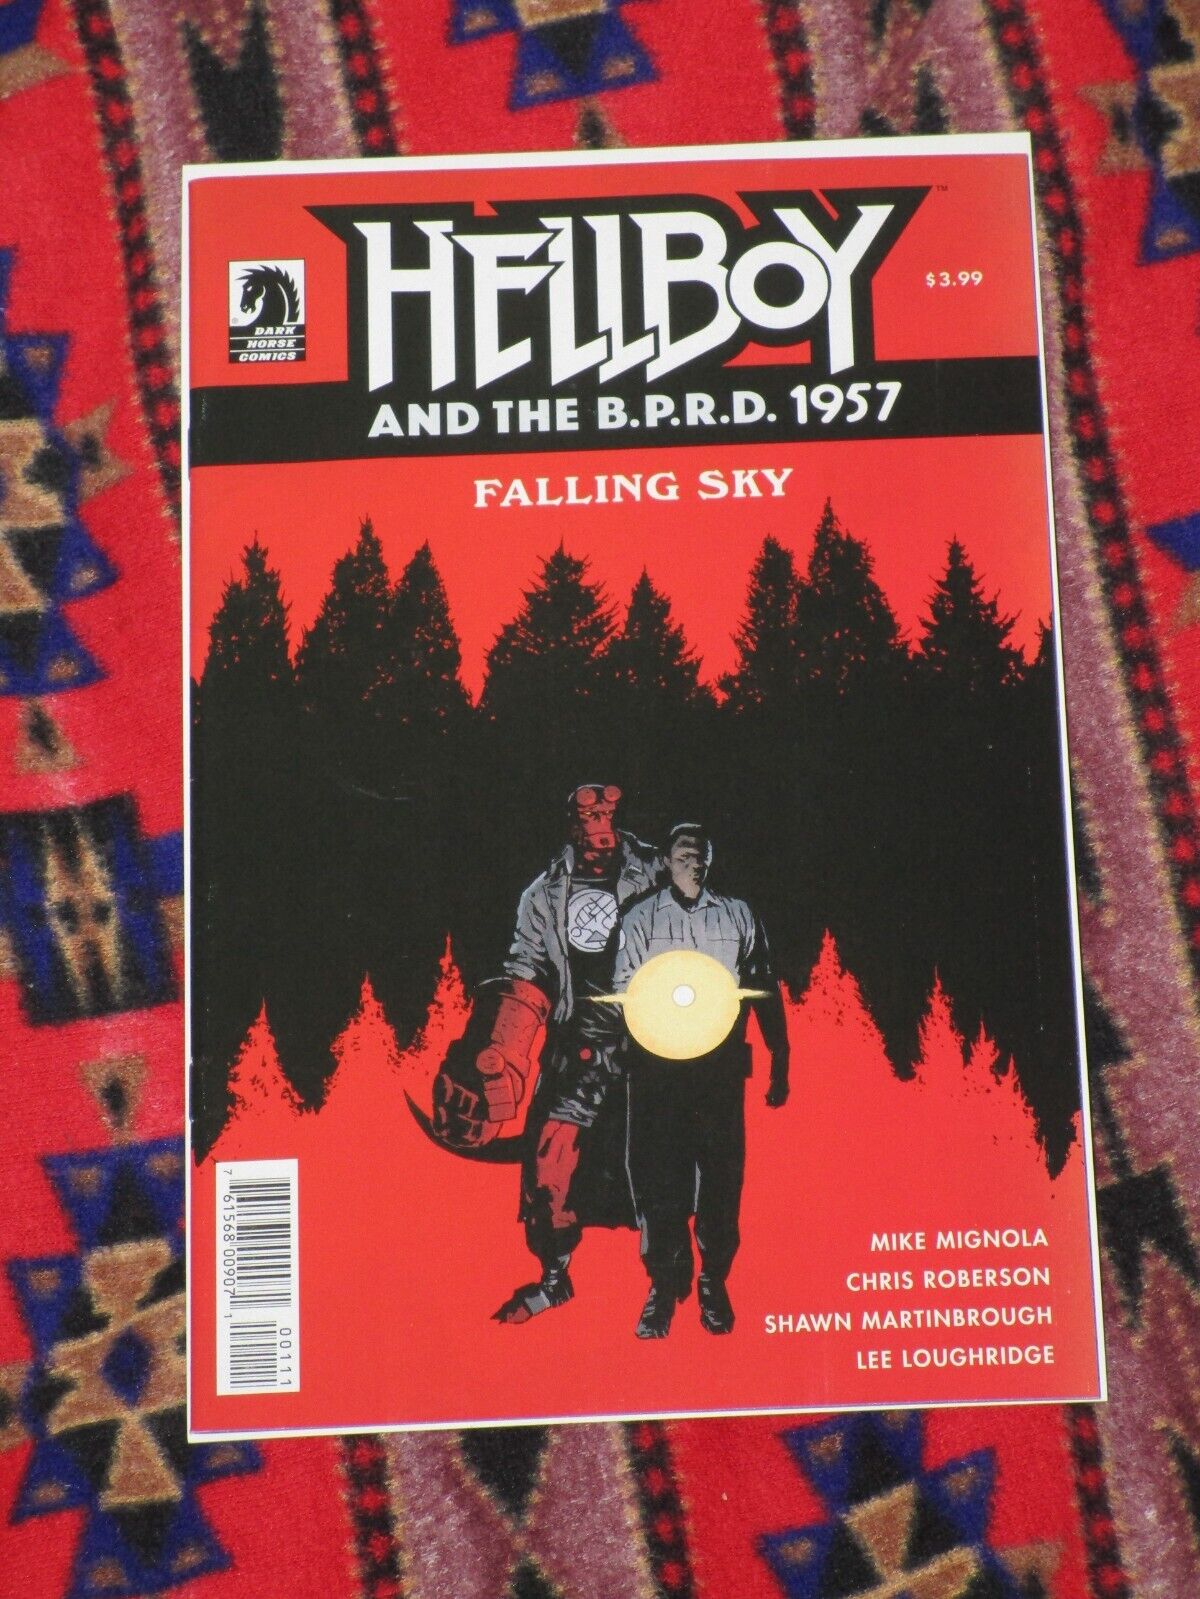 Hellboy and the B.P.R.D. 1957: Fallen Sky August 2022 (Mignola and Roberson)